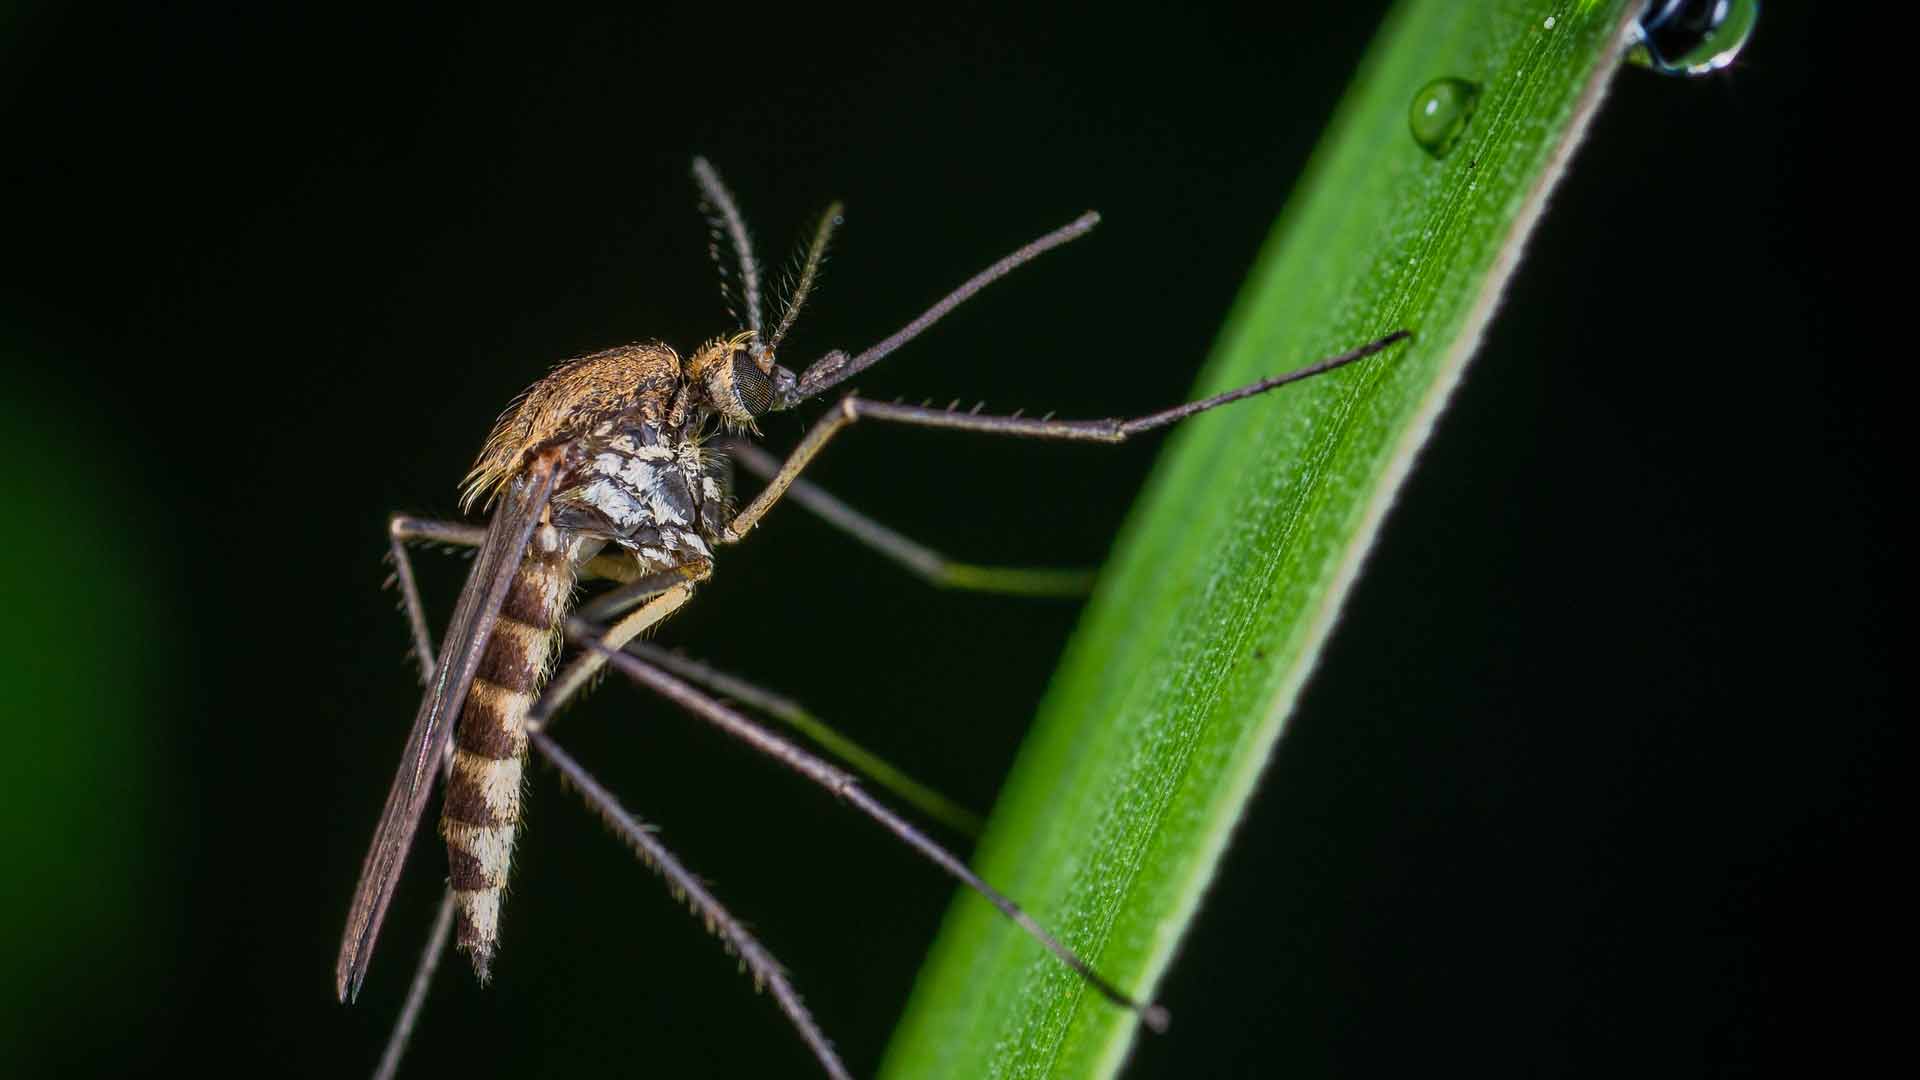 We offer mosquito control services to the areas in and around Lunenburg, MA.